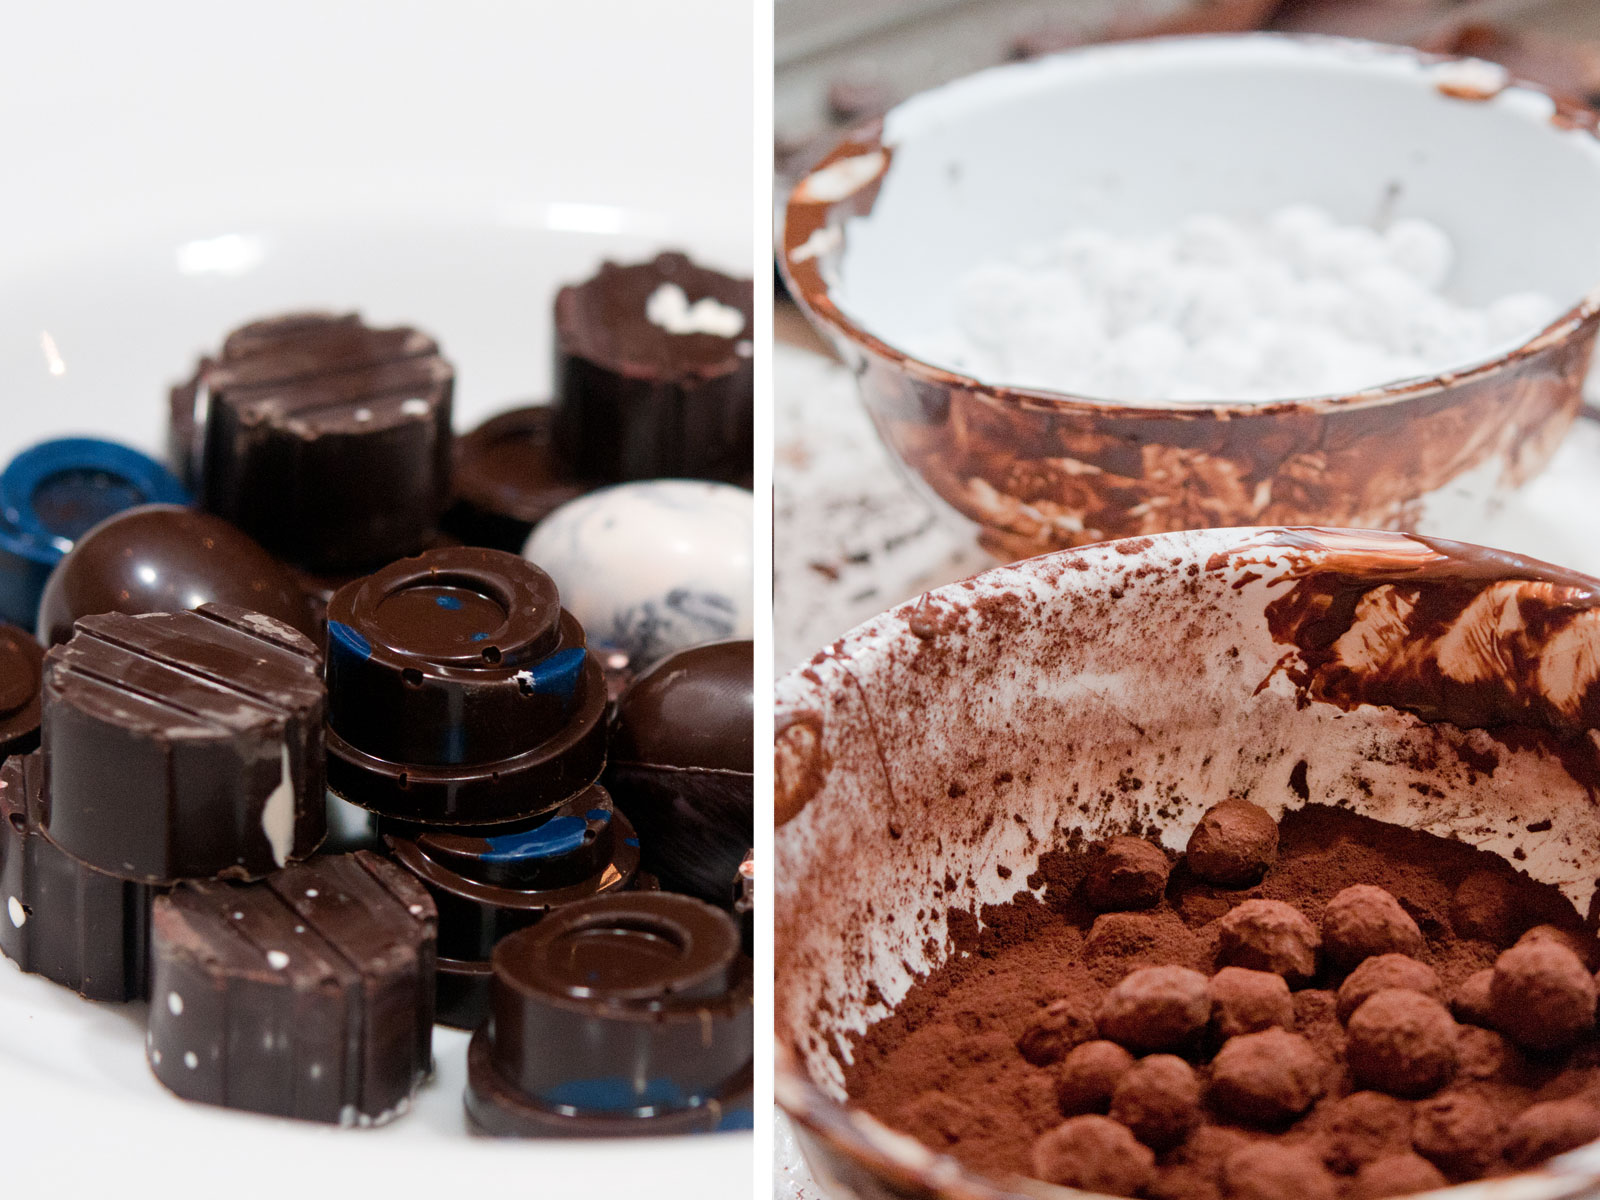 Which popular holiday is often associated with chocolate truffles?